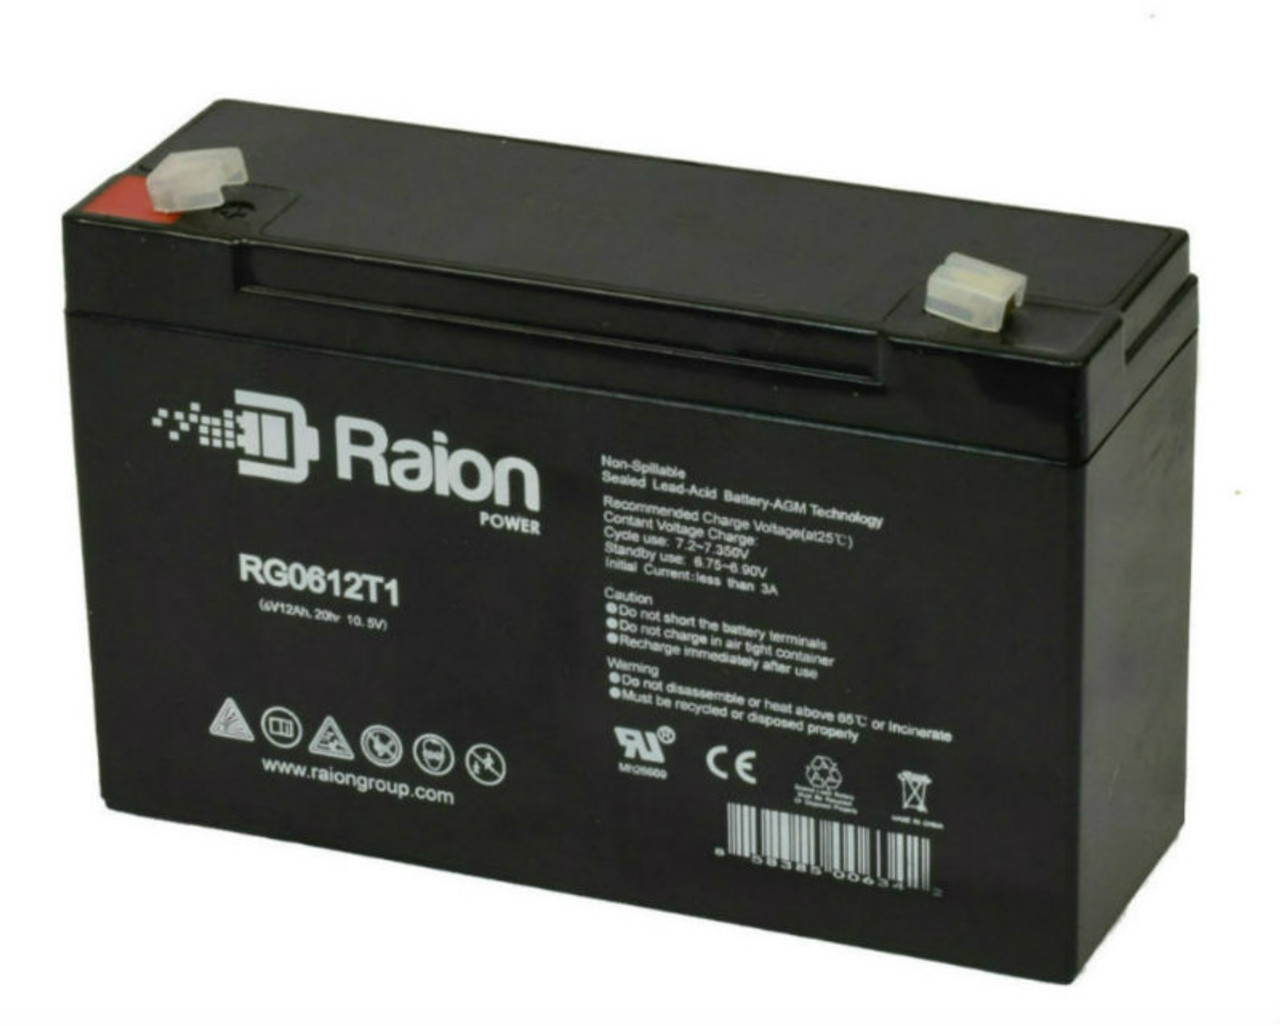 Raion Power RG06120T1 Replacement 6V 12Ah Emergency Light Battery for Chloride CMF36